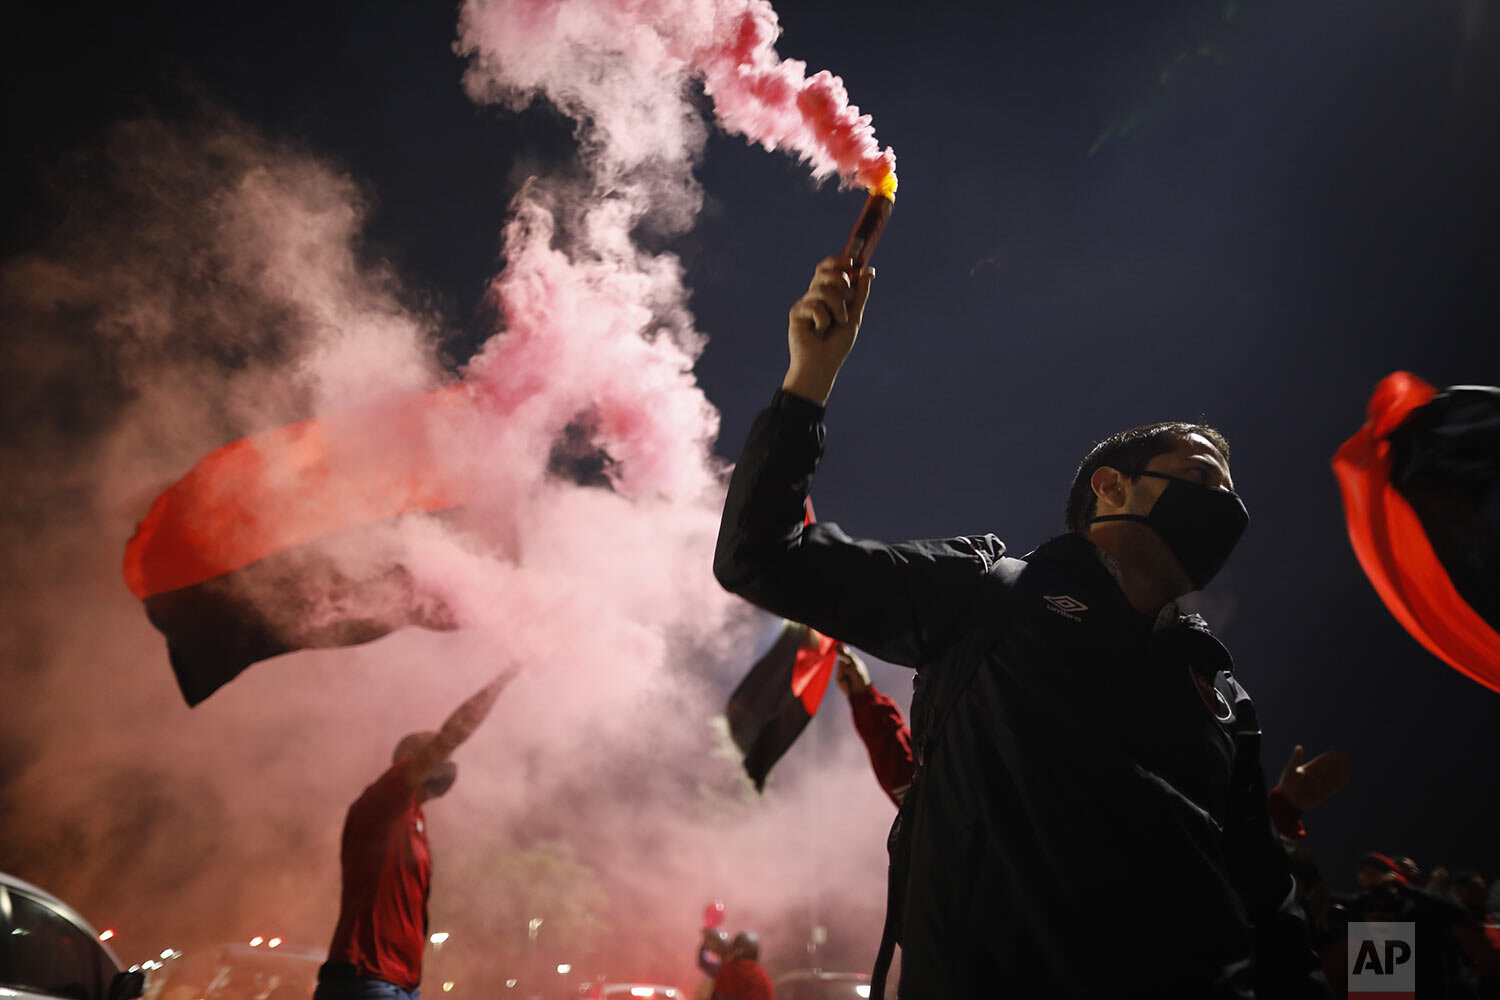  A soccer fan holds a flare during a caravan by Newell's Old Boys club in the hometown of star player Leonel Messi in Rosario, Argentina, Aug. 27, 2020, with the aim of luring him home after his announcement he wants to leave Barcelona F.C. (AP Photo